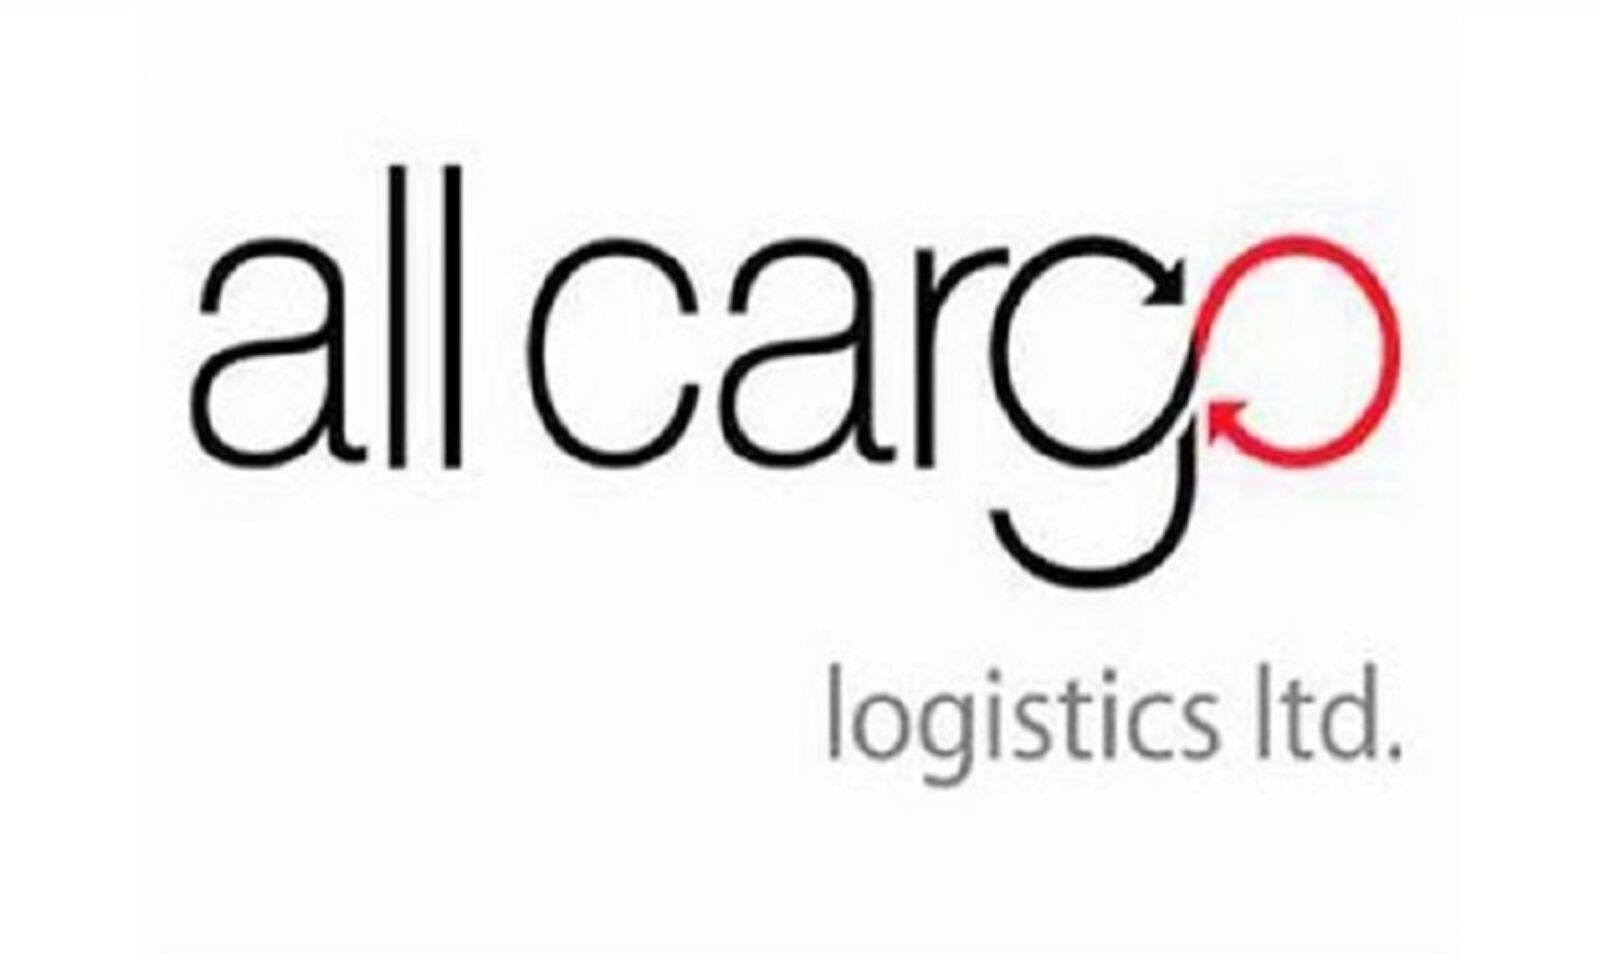 allcargo logistics board approves demerger of cfs/icd &amp; real estate businesses